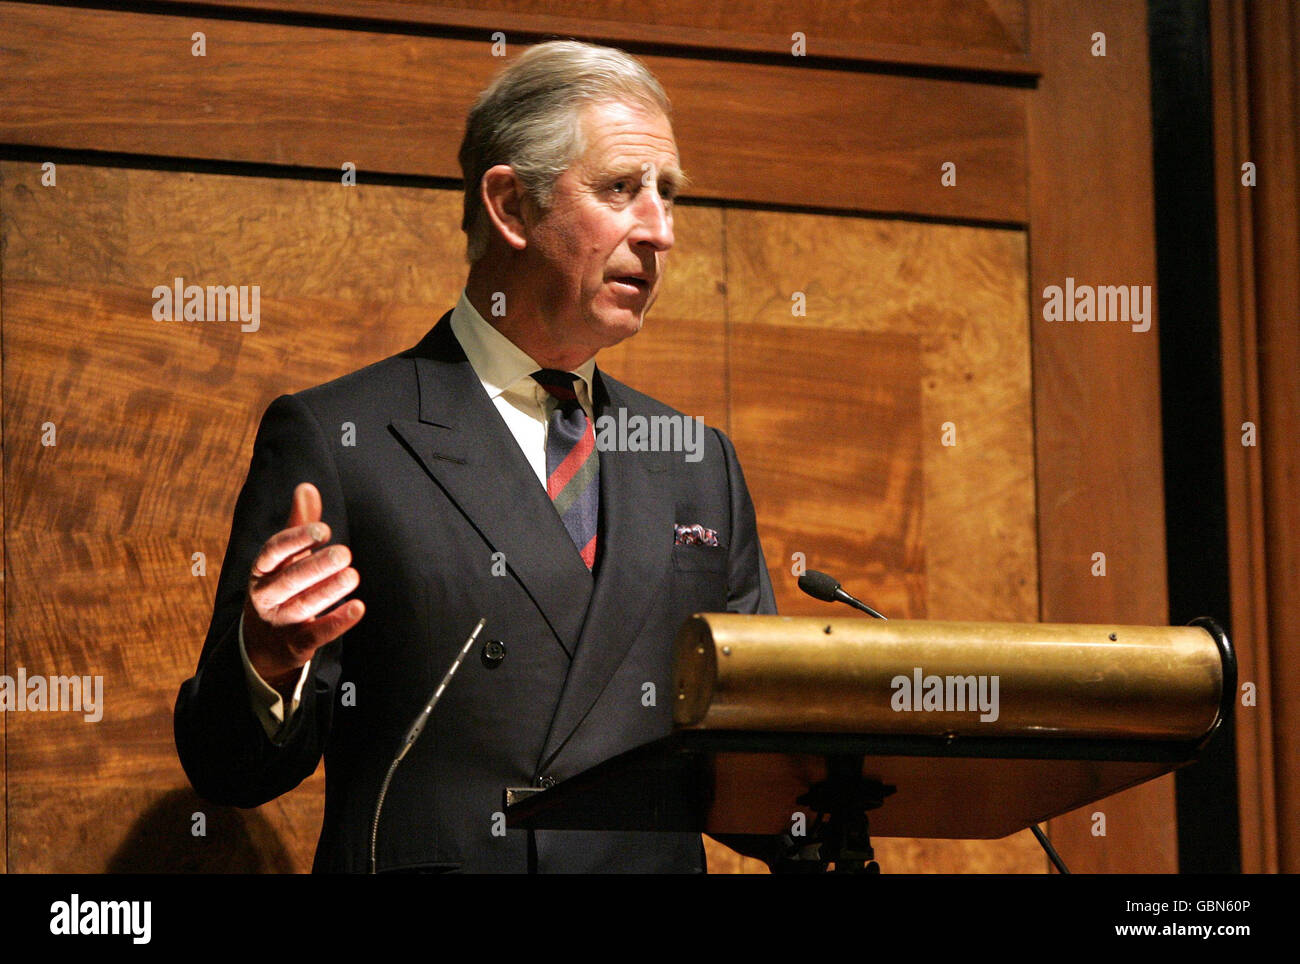 The Prince of Wales delivers his speech at the 2009 Royal Institute of British Architects (RIBA) Trust in London. Stock Photo